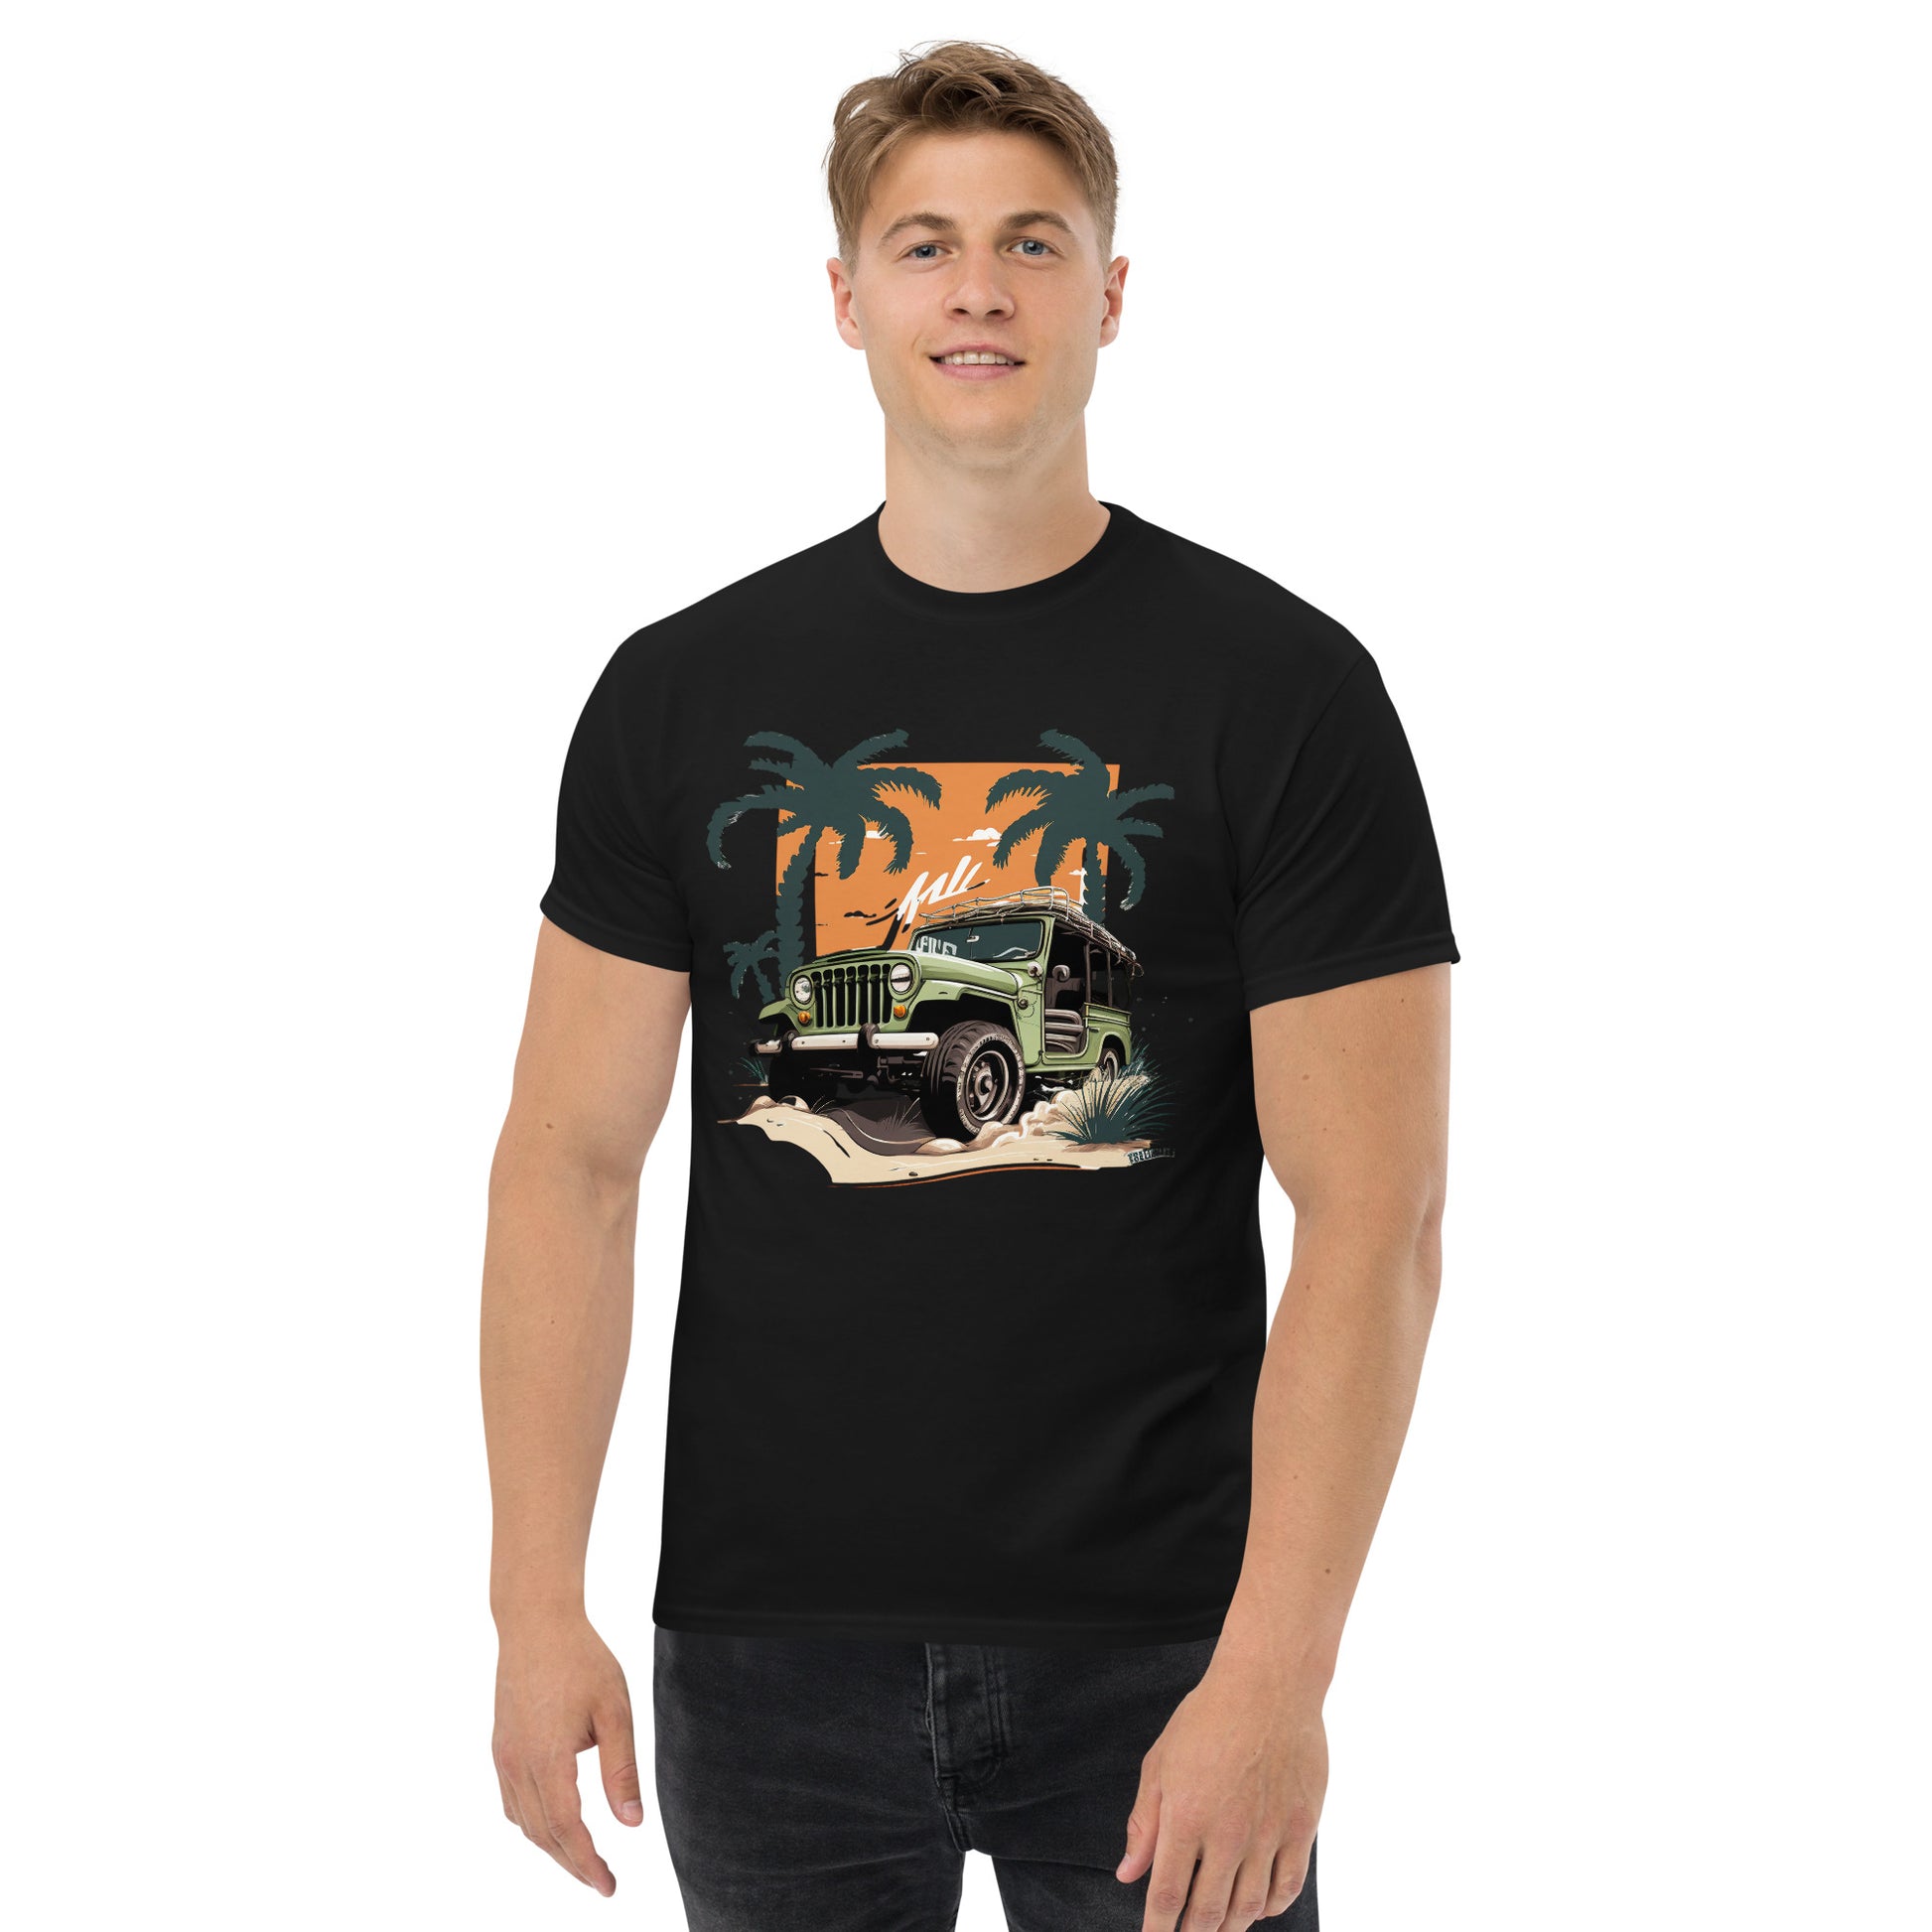 man with black t-shirt with picture of jeep in front of palm trees 